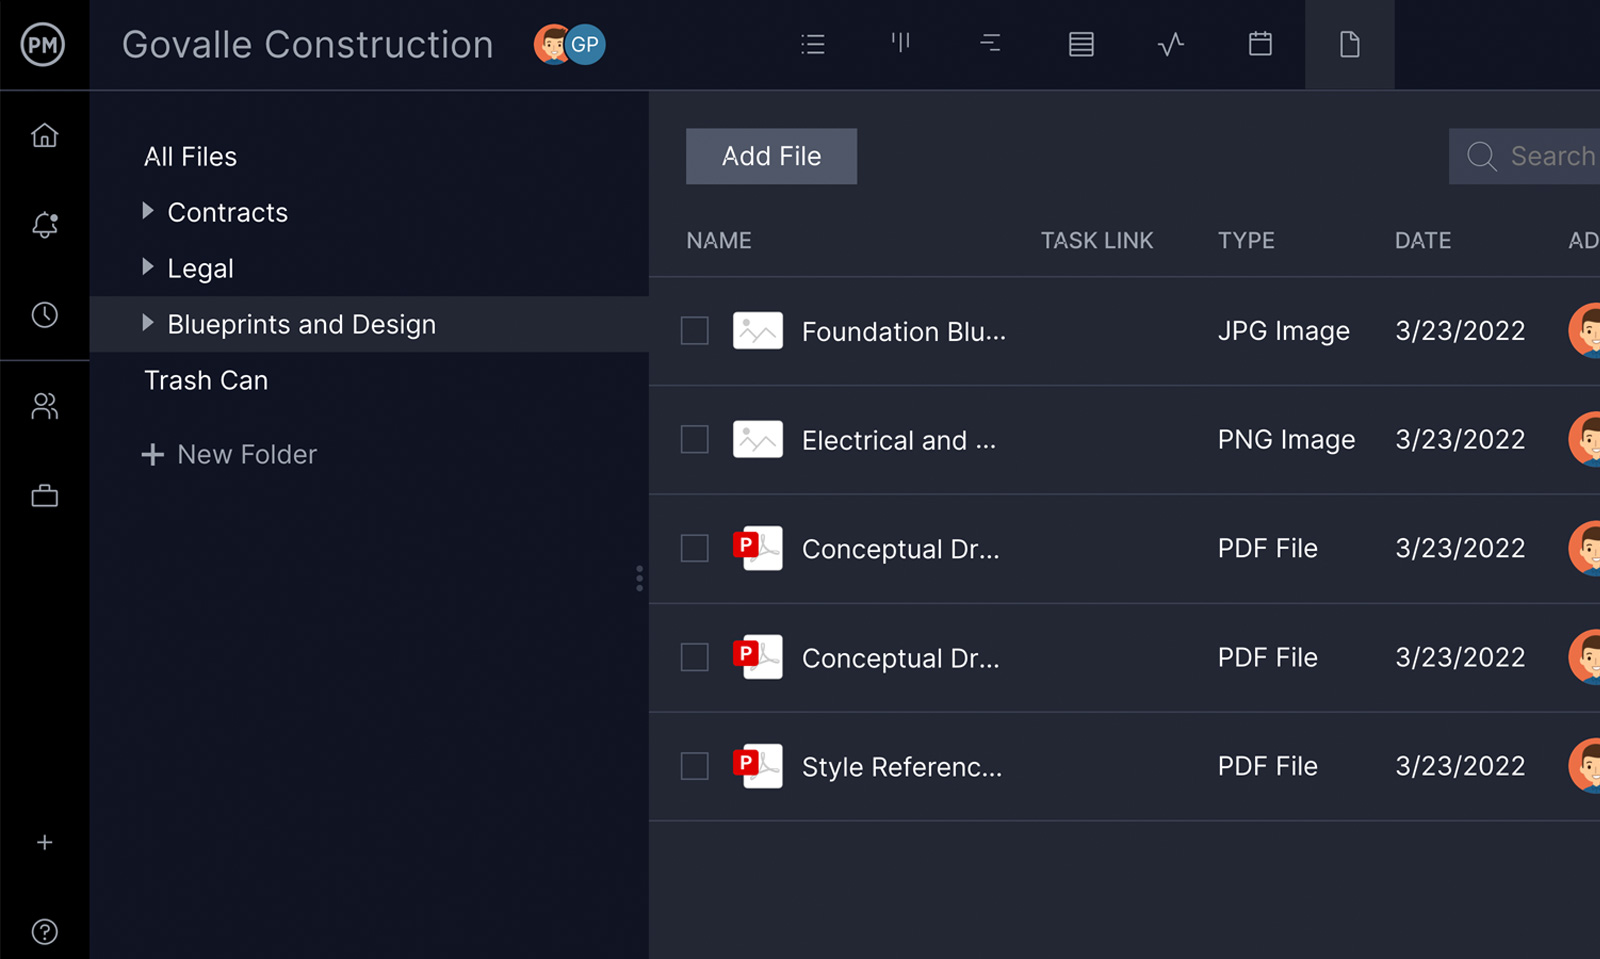 ProjectManager's file sharing features help manufacturing project management teams work better